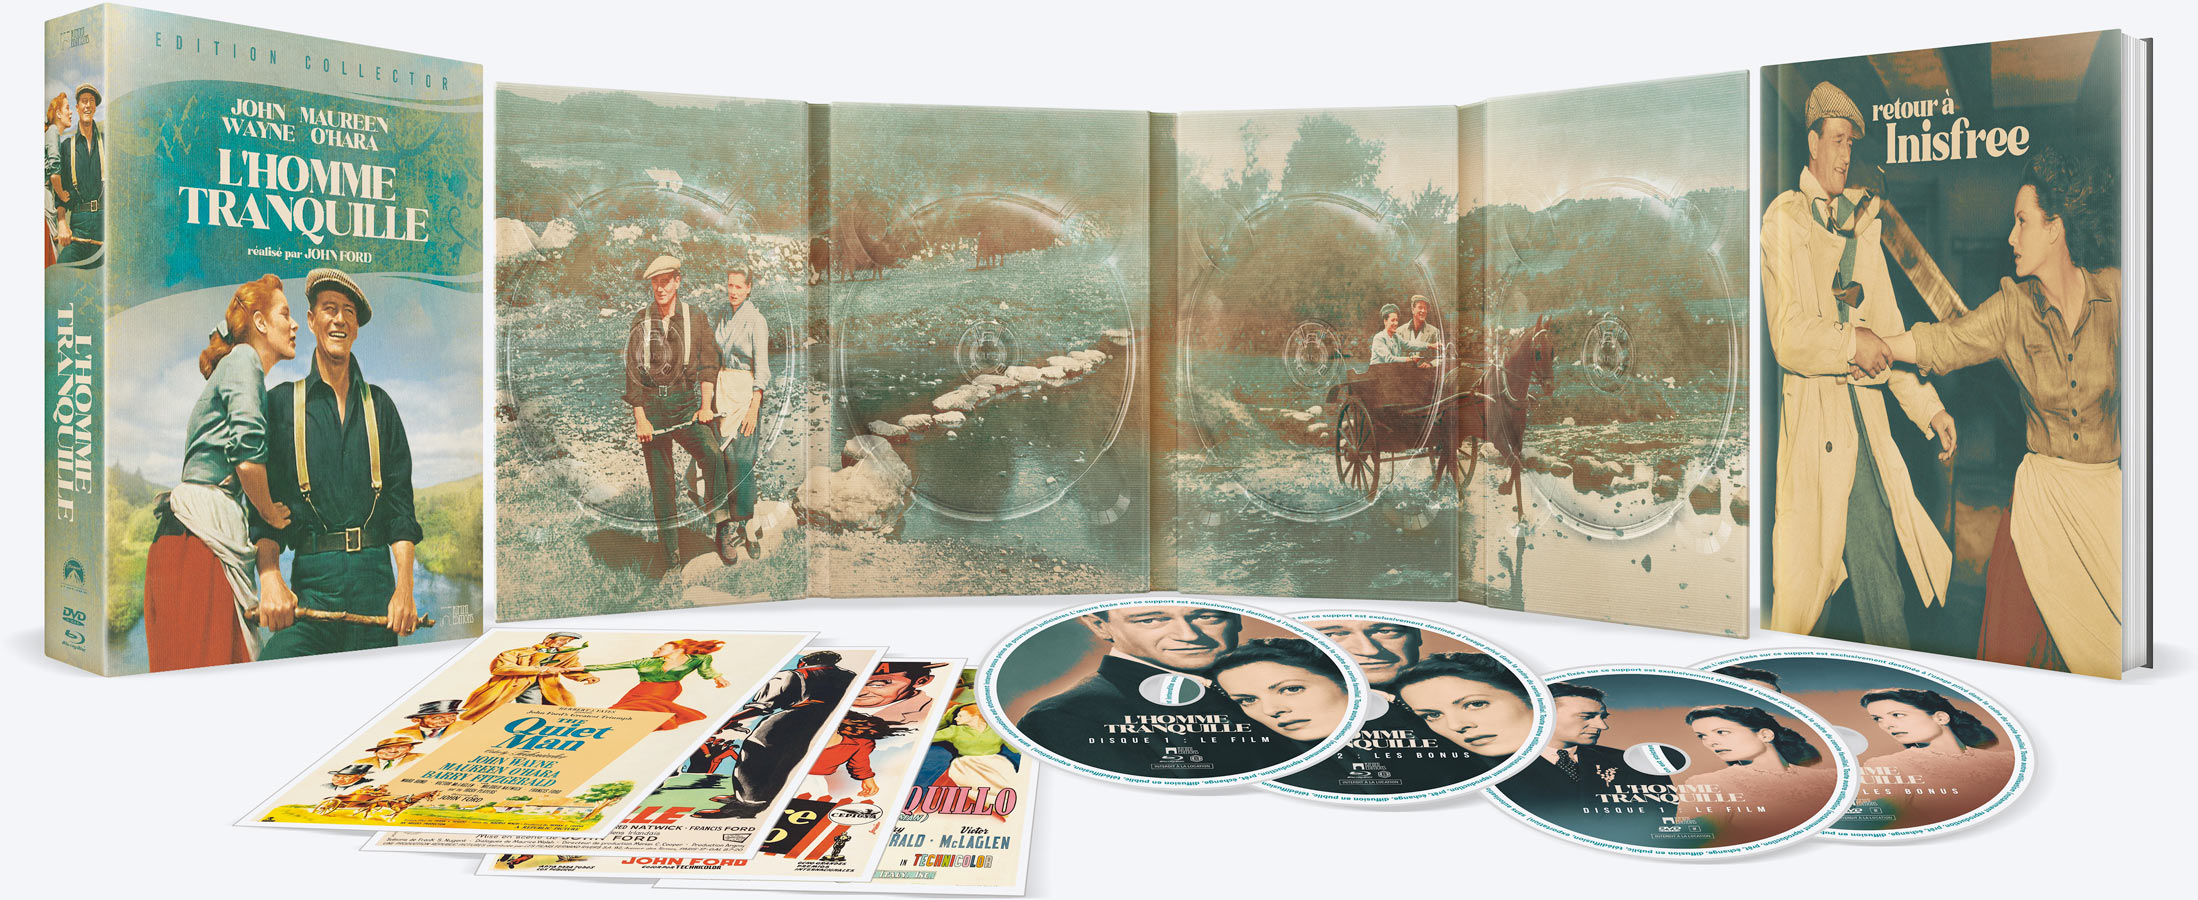 L'Homme tranquille (1952) - Édition Collector Blu-ray + DVD